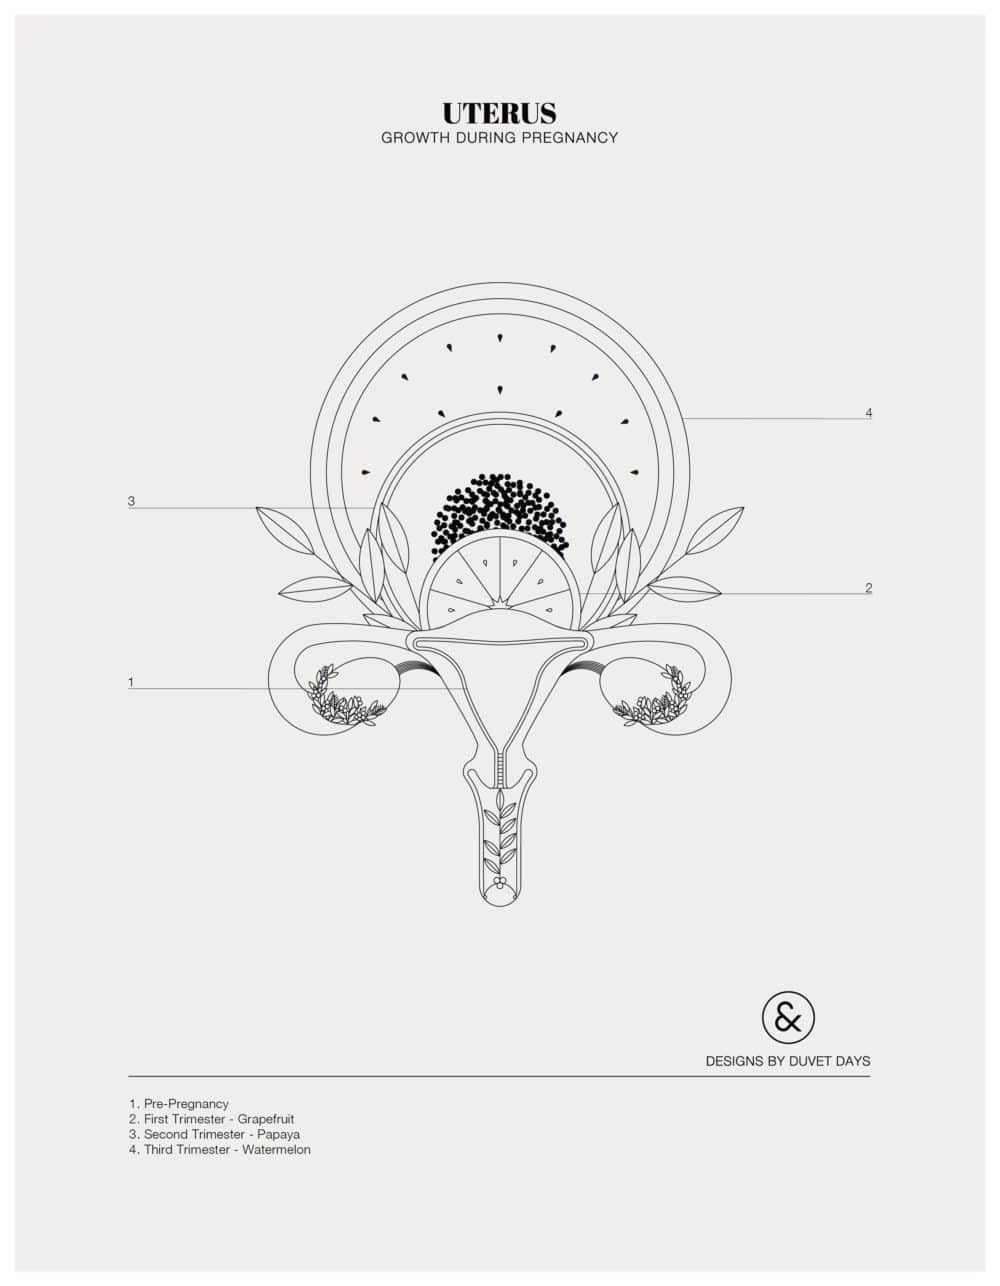 Designs By Duvet Days_8.5x11_Uterus Growth during Pregnancy_Colouring Sheet_Preview